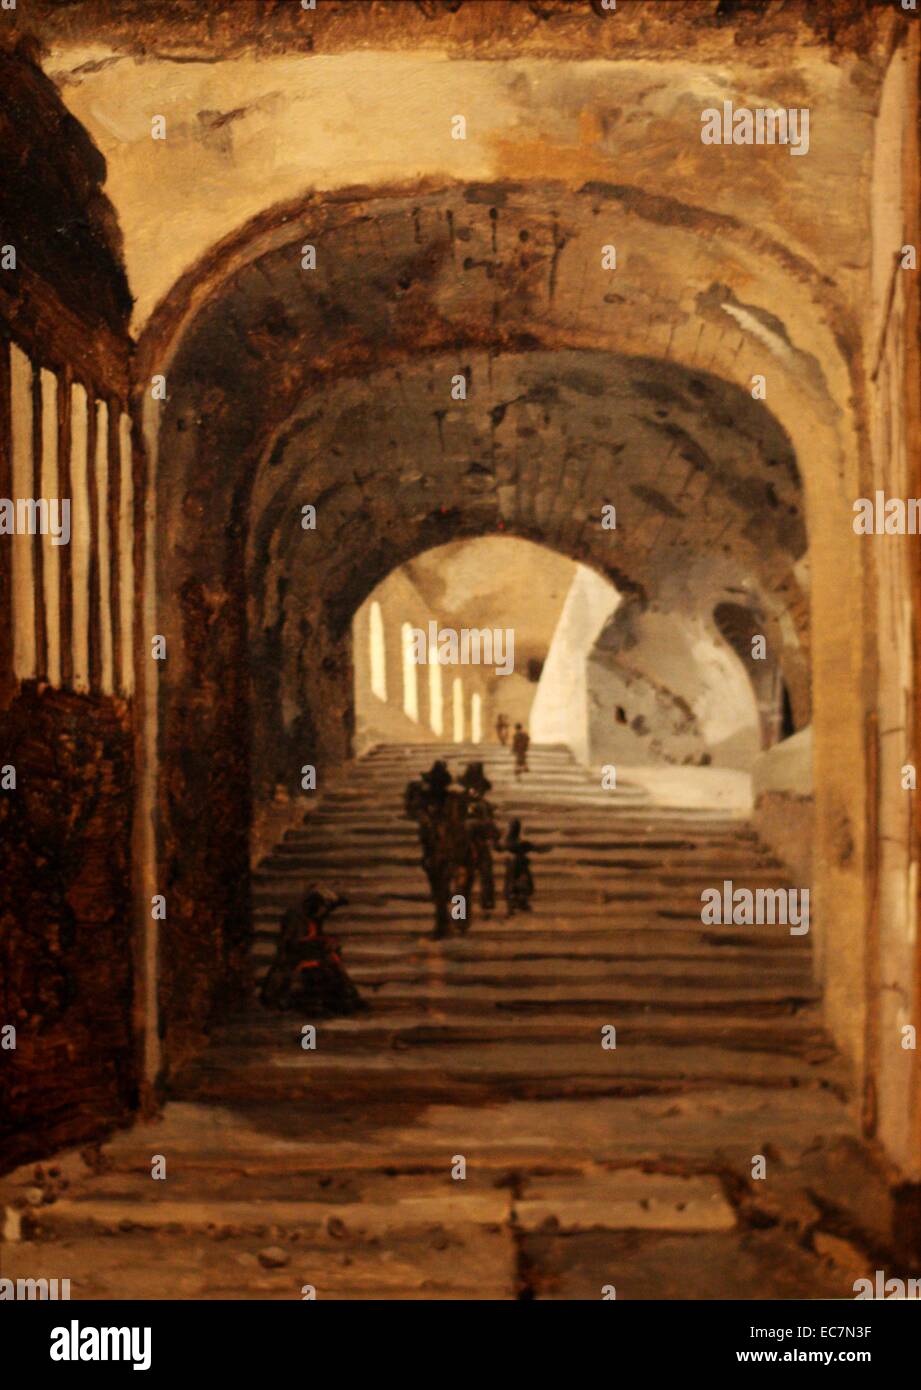 Attributed to Jean-Baptiste-Camille Corot (1796-1875) Staircase in the Entrance to the Villa of Maecenas at  Tivoli.  Oil on paper laid on canvas.  The Villa was constructed by the celebrated patron of the arts, Maecenas, who was also the epitome of decadence, on both counts.  He was a fascinating figure to artists visiting Rome. Stock Photo